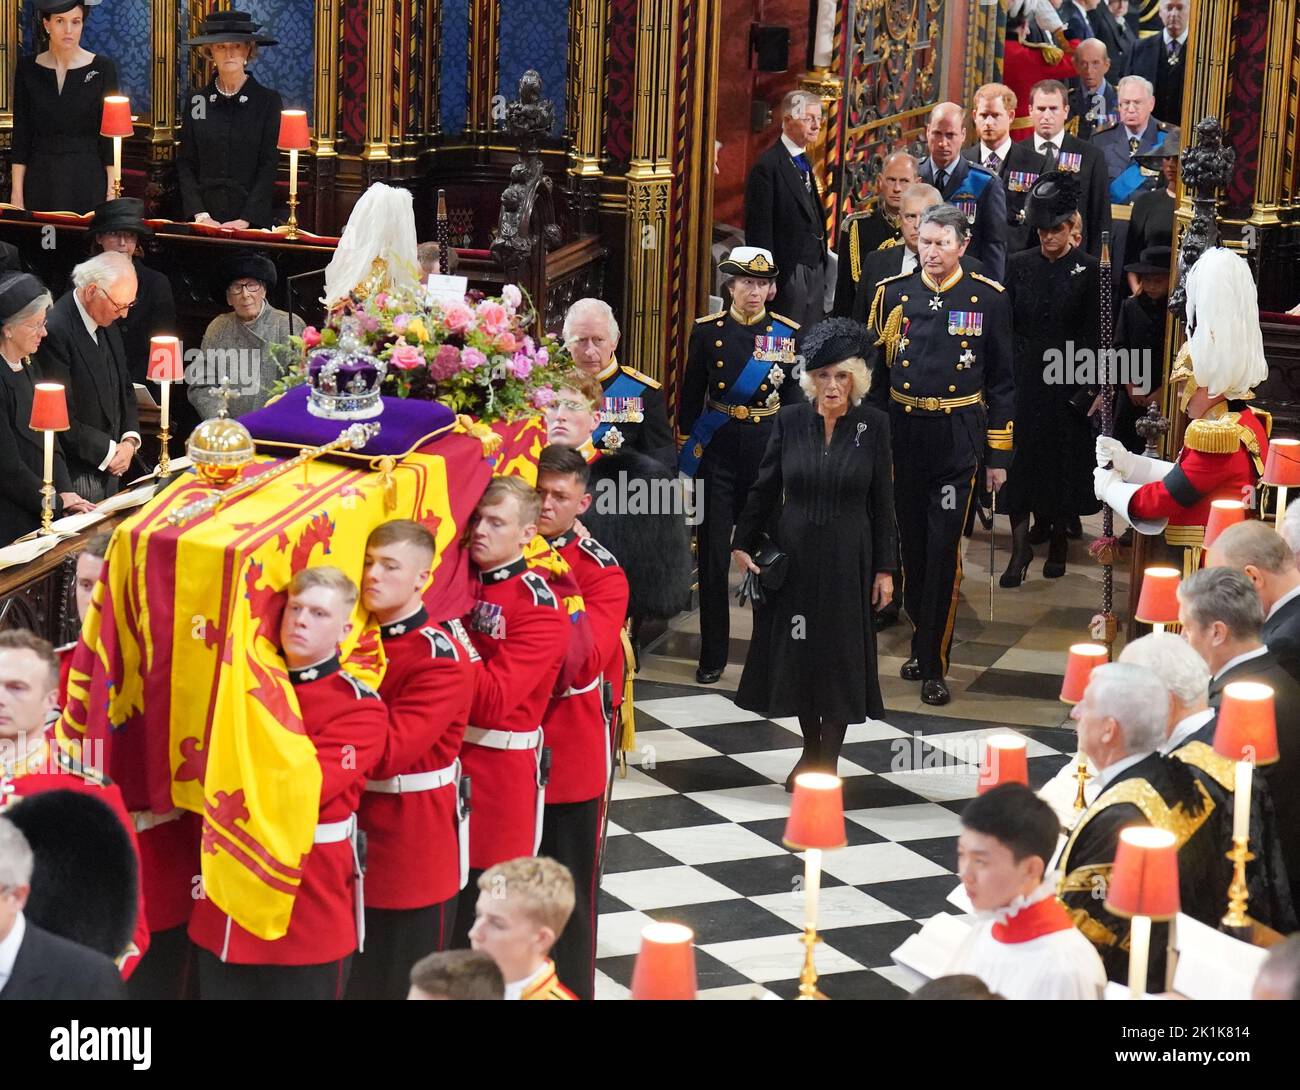 The coffin of Queen Elizabeth II is carried into Westminster Abbey, followed by King Charles III, the Queen Consort, the Princess Royal, Vice Admiral Sir Tim Laurence, the Duke of York, the Earl of Wessex, the Countess of Wessex, the Prince of Wales, the Princess of Wales, Prince George, Princess Charlotte, the Duke of Sussex, the Duchess of Sussex and Peter Phillips, for her State Funeral at the Abbey in London. Picture date: Monday September 19, 2022. Stock Photo